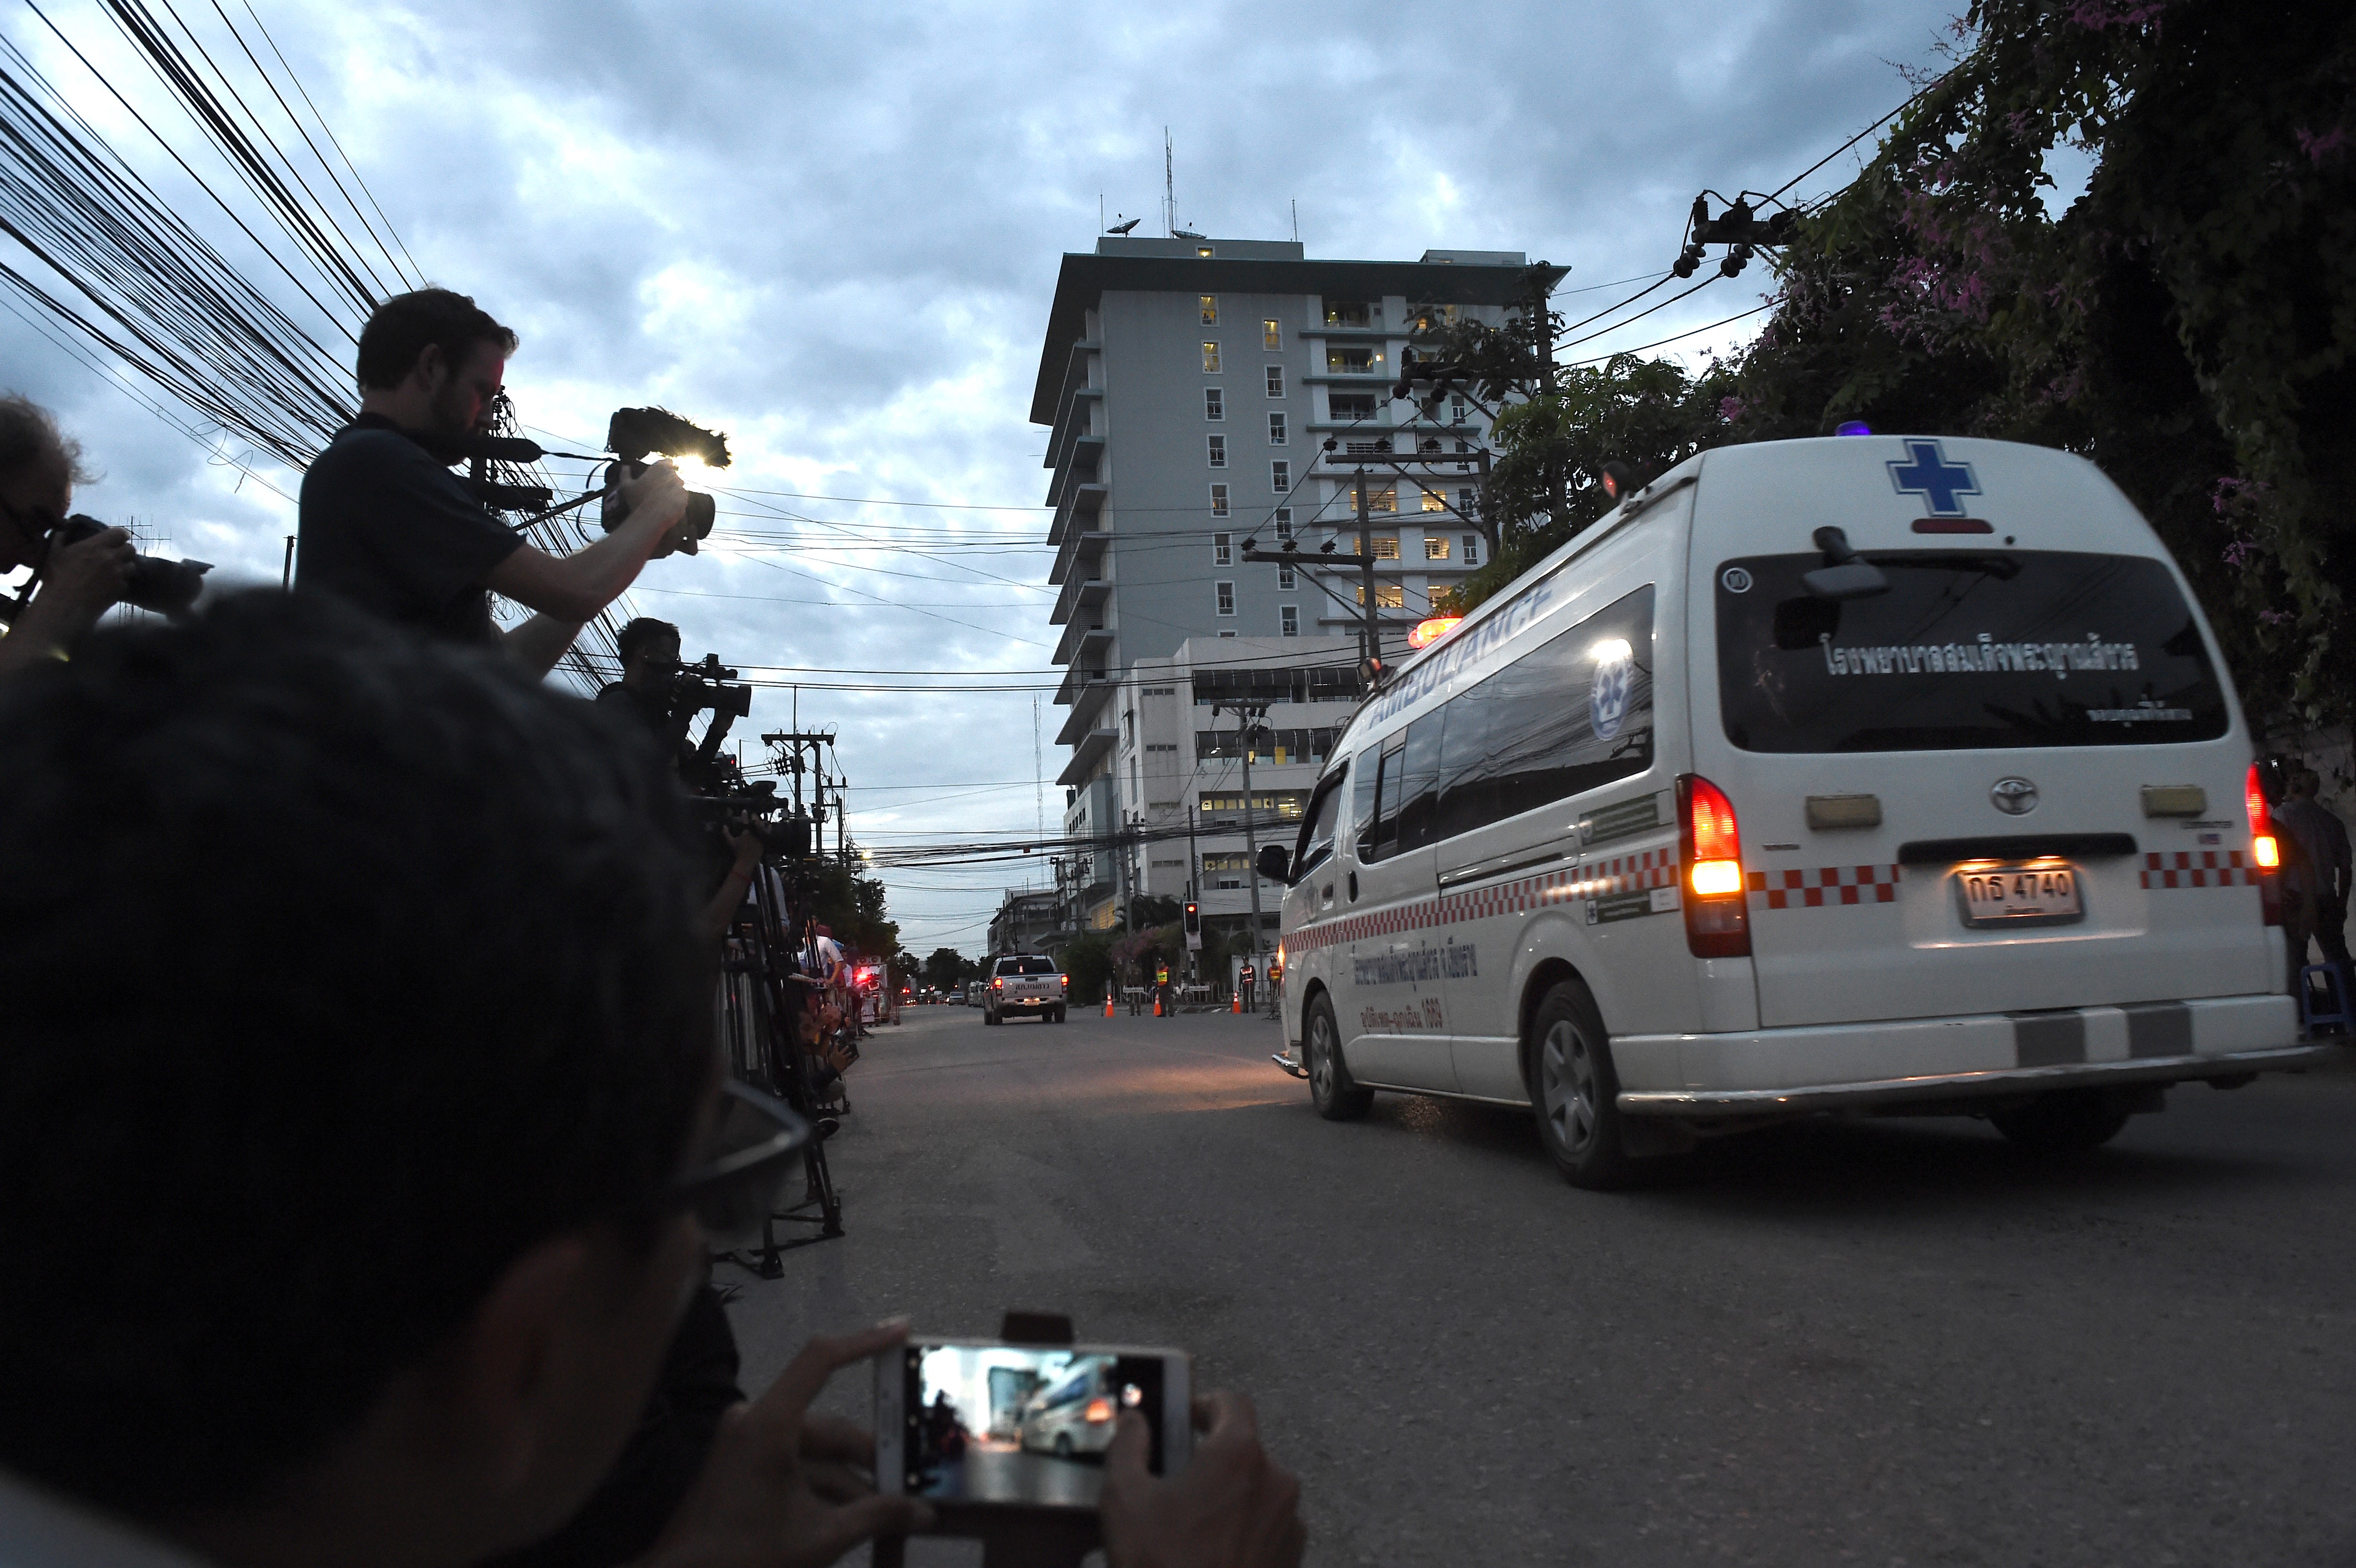 An ambulance reportedly transporting members of the soccer team approaches the hospital in Chiang Rai on July 10, 2018 after being rescued in Tham Luang cave.